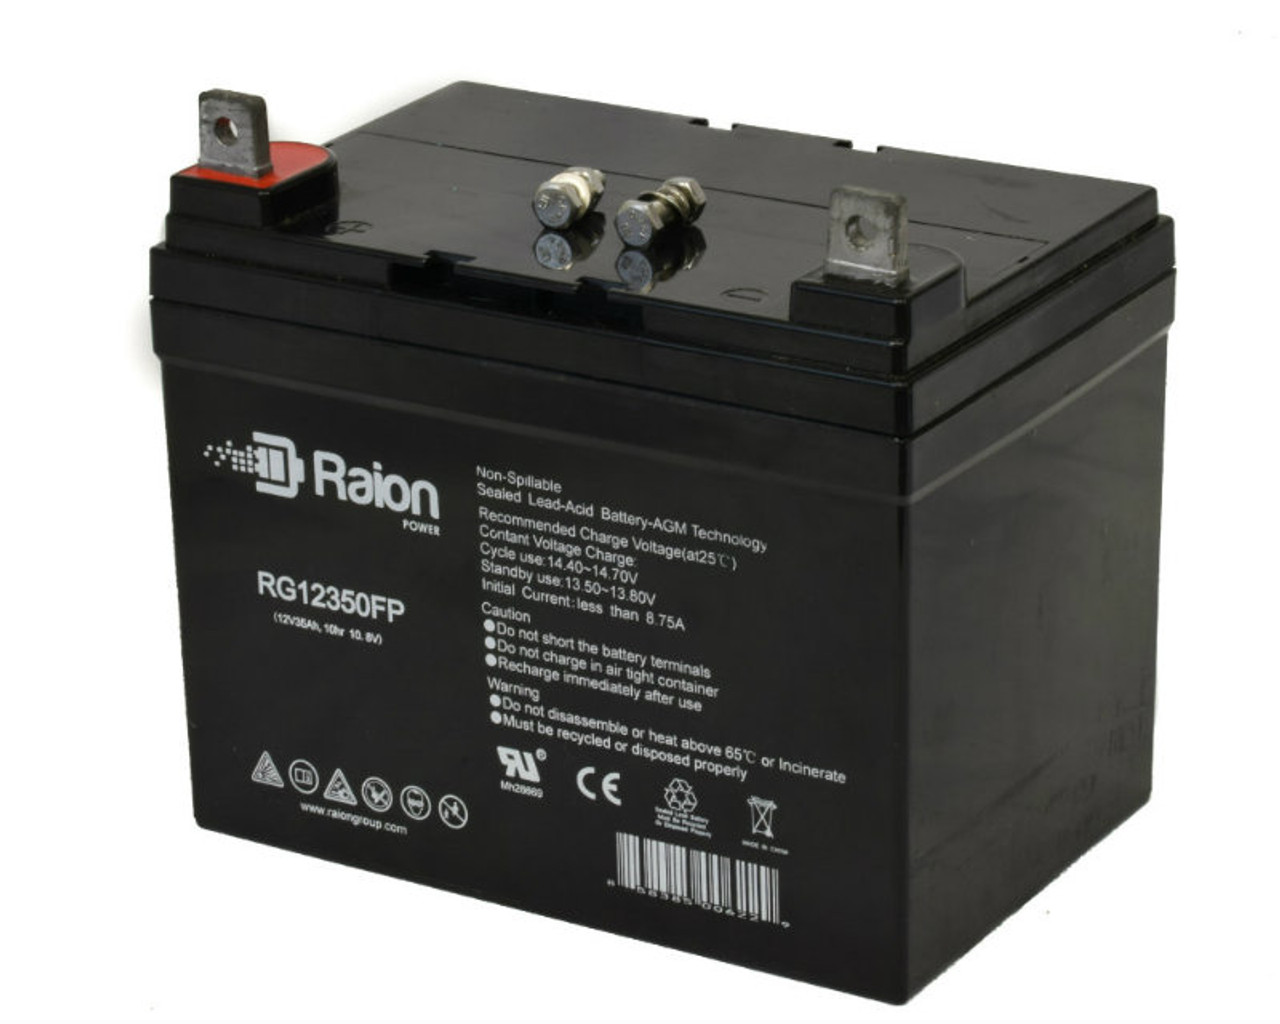 Raion Power Replacement 12V 35Ah RG12350FP Mobility Scooter Battery for Everest & Jennings Wheelchairs 3N